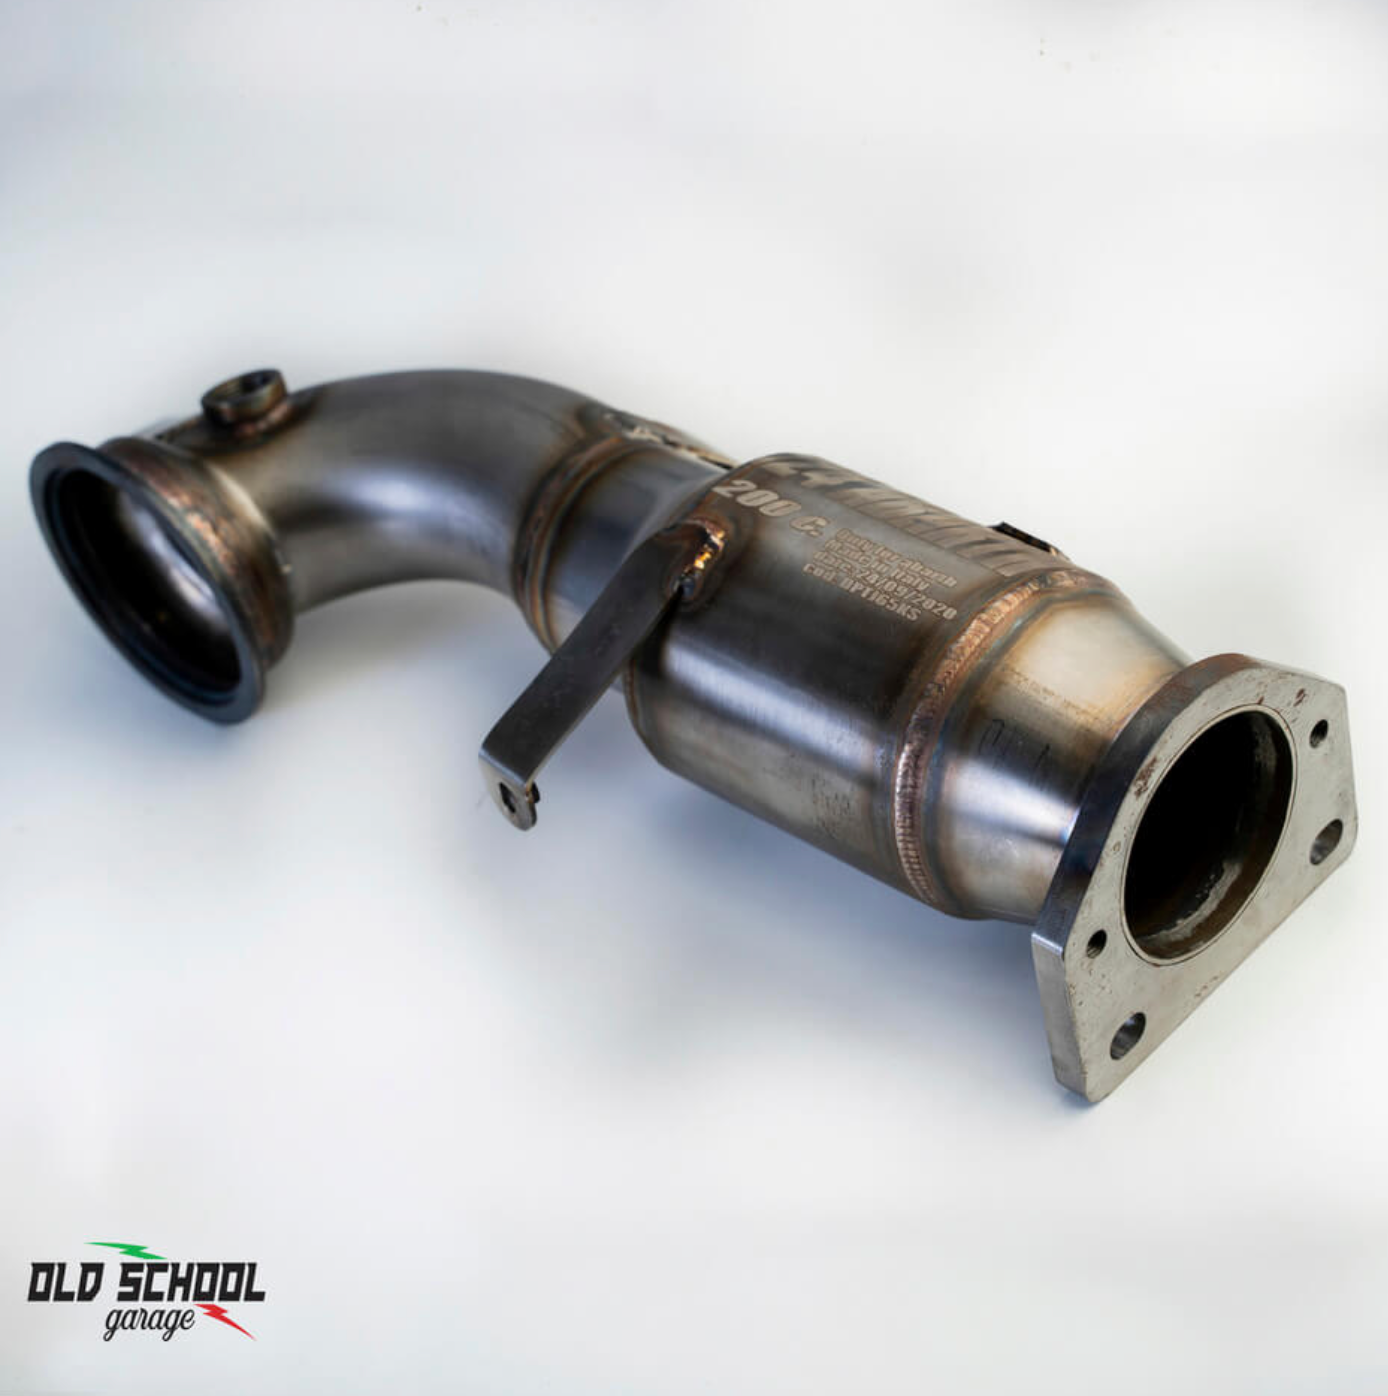 DOWNPIPE 200 CELLE 1446 124 ABARTH - OLD SCHOOL GARAGE